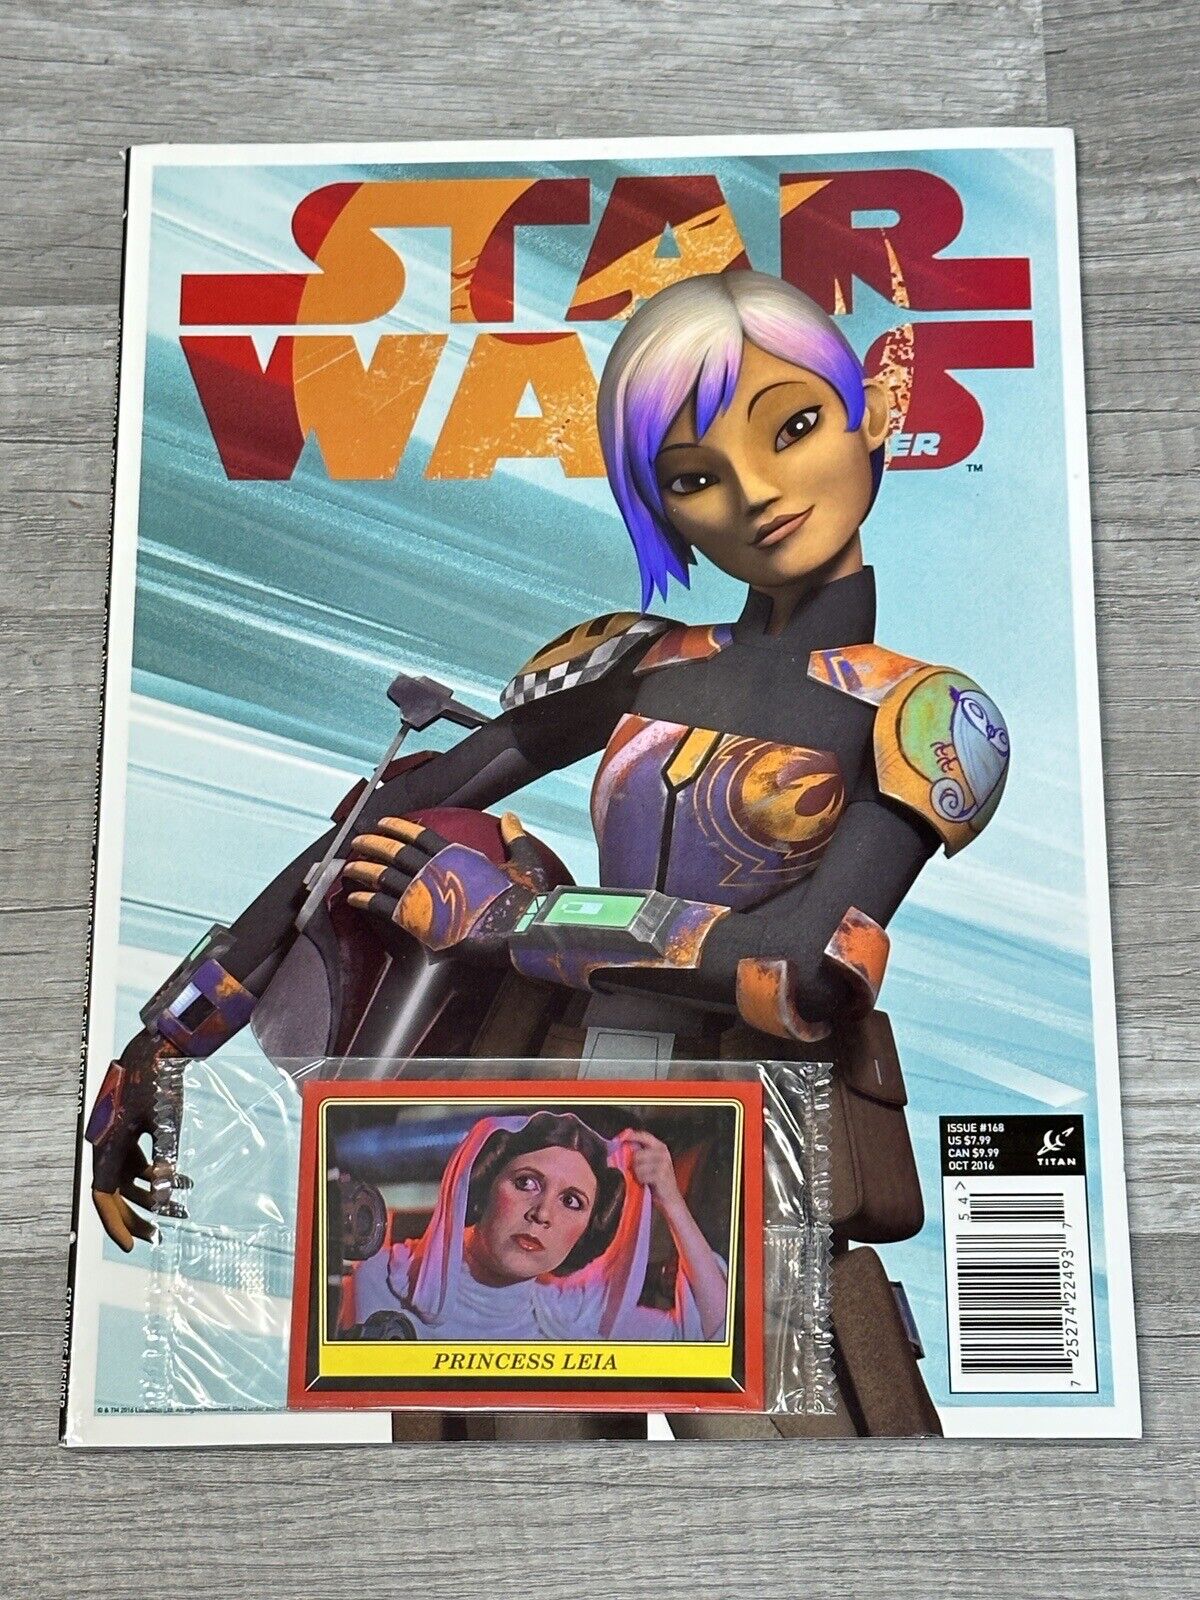 2016 STAR WARS INSIDER #168 1st SABINE WREN variant cover With sealed Leia Card